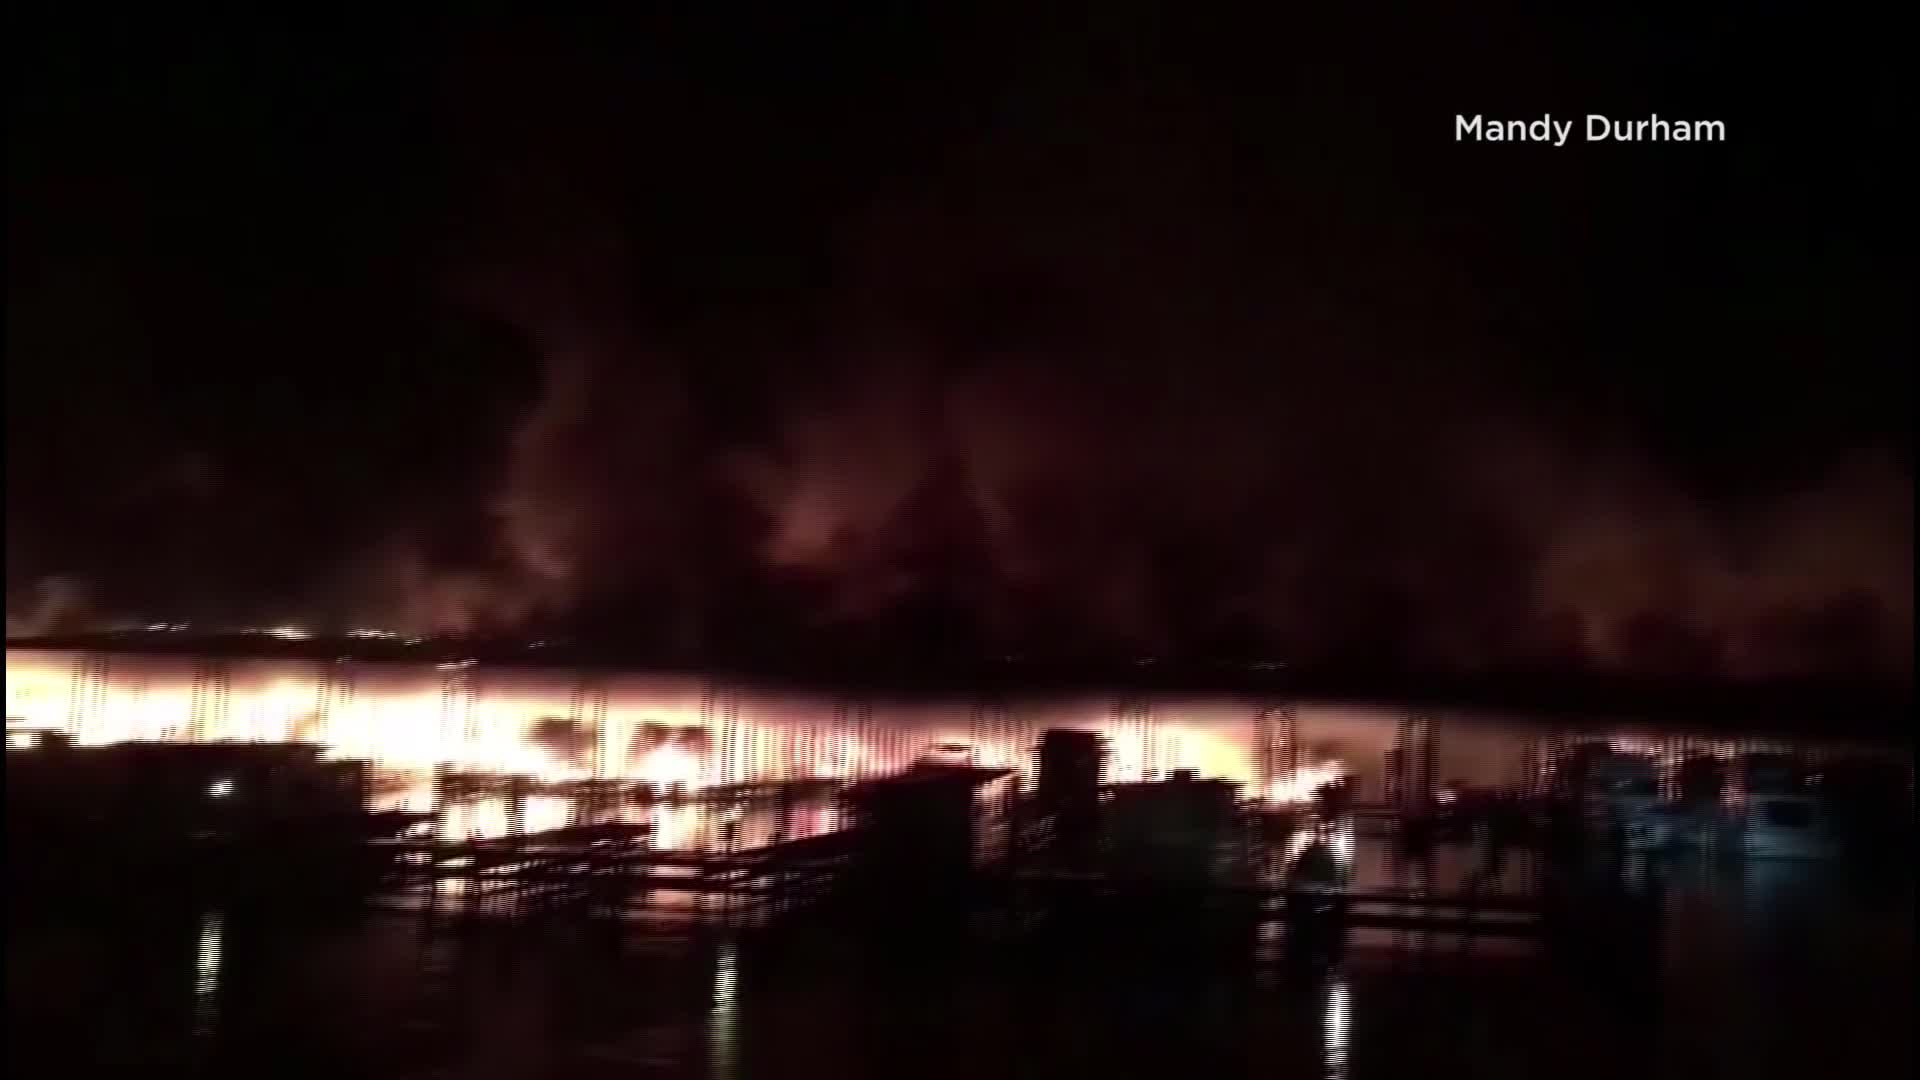 Thumbnail for the video titled "At least 8 died in marina boat dock fire, Alabama fire chief says"